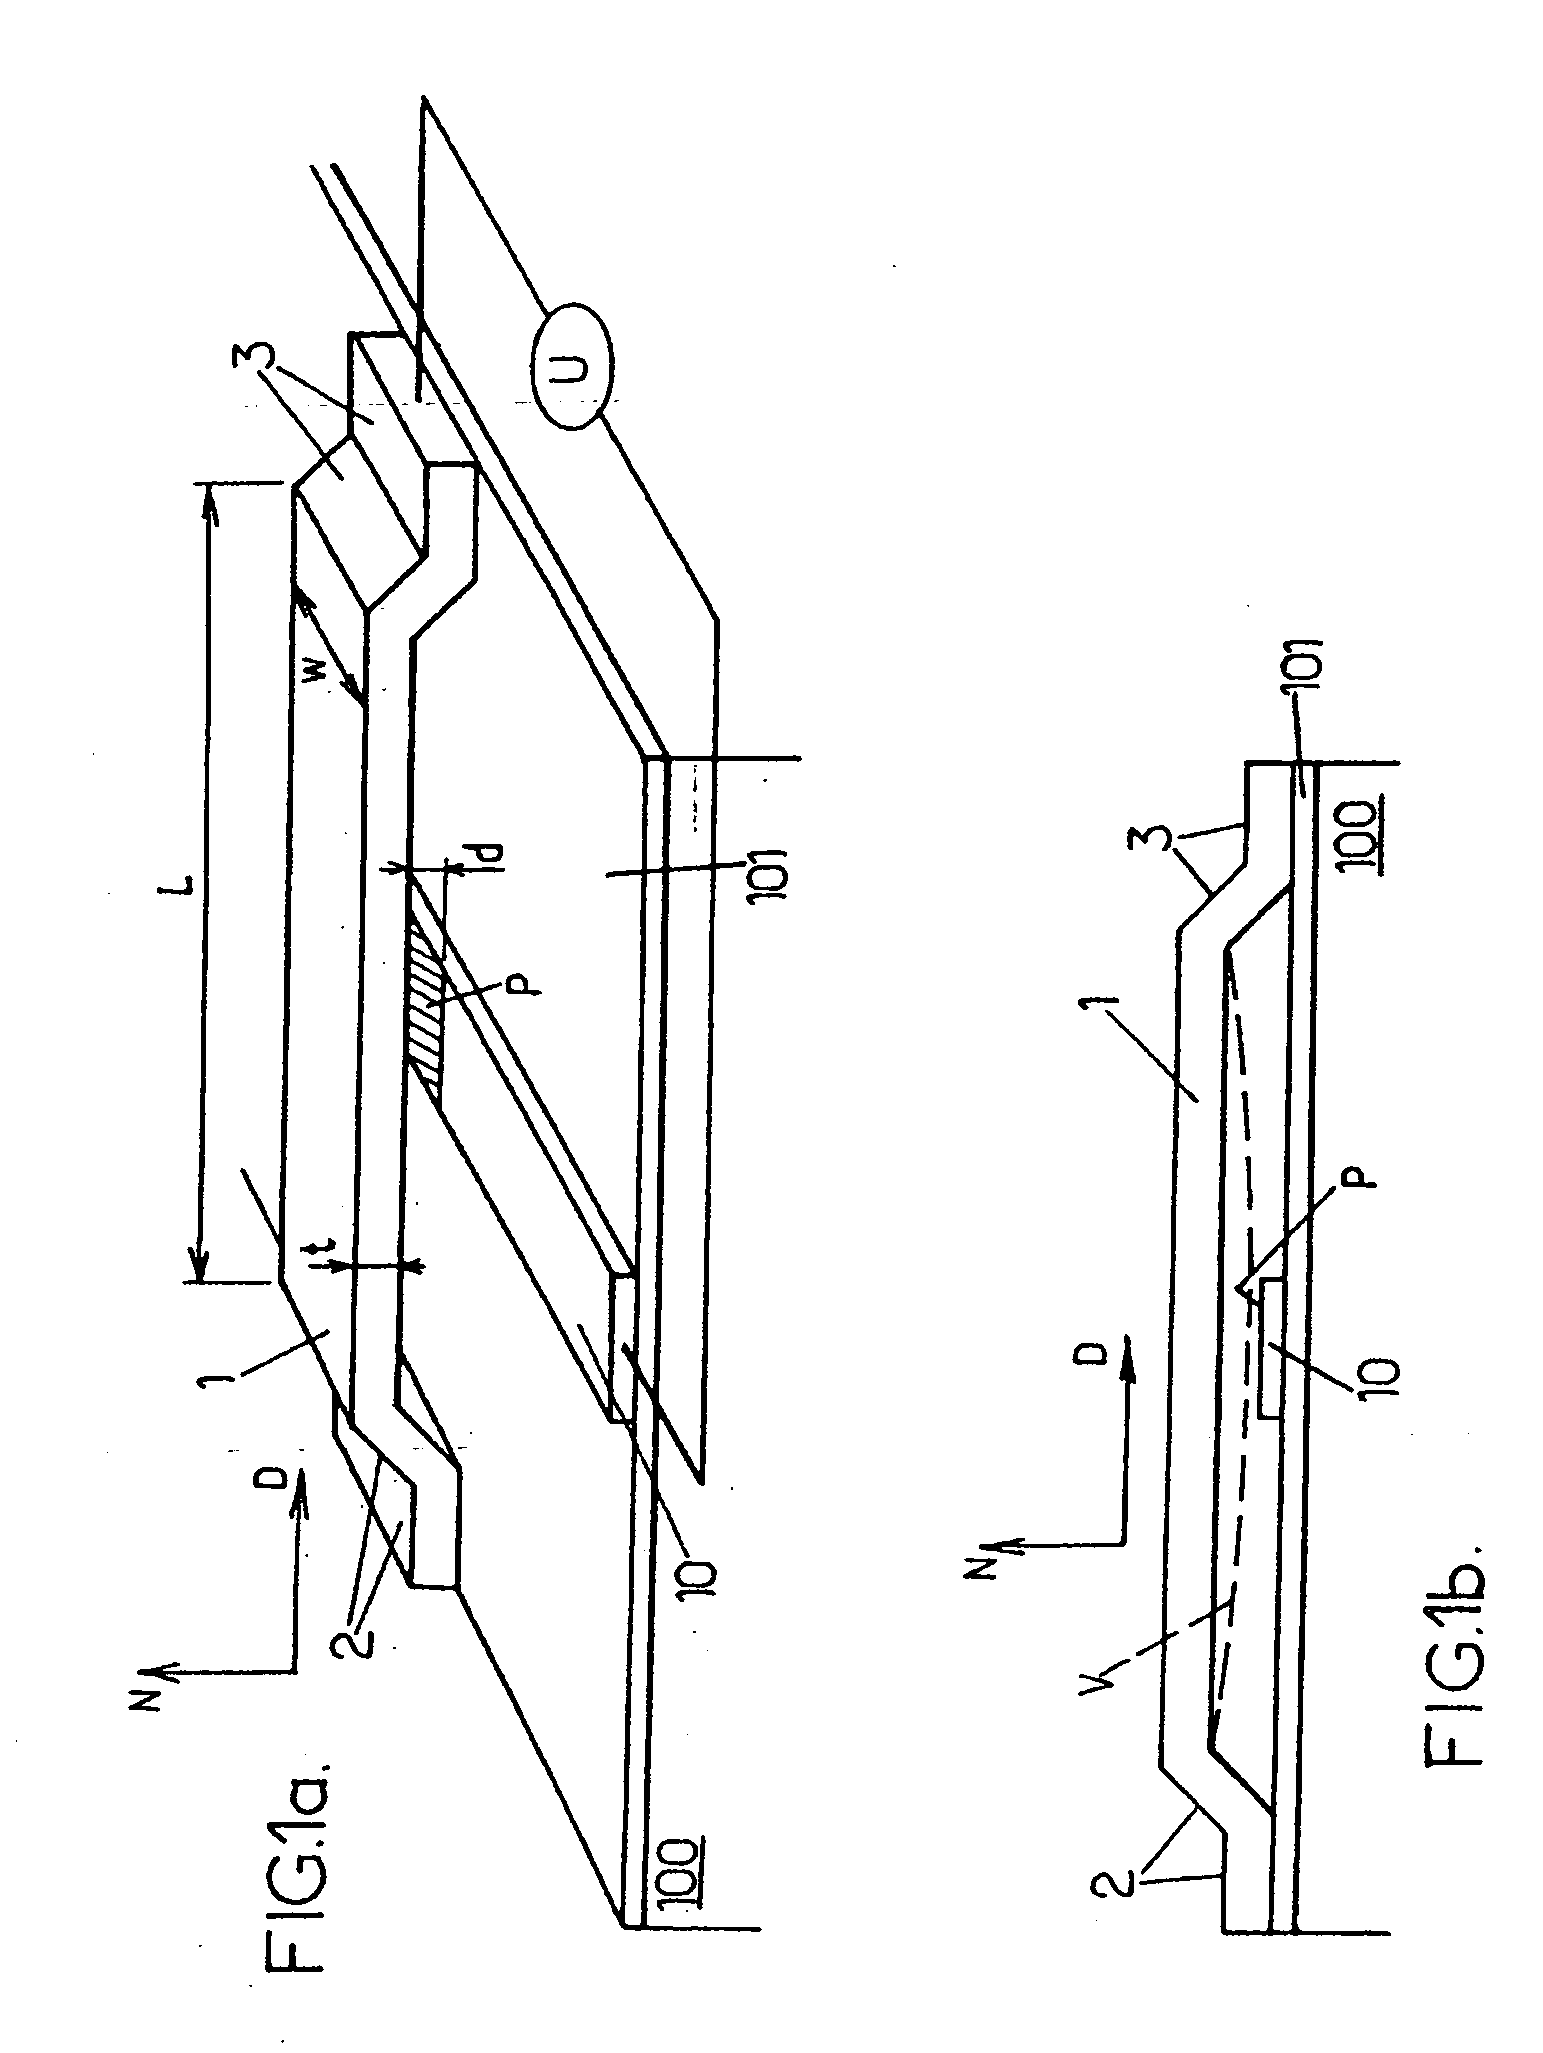 Microelectromechanical system comprising a beam that undergoes flexural deformation